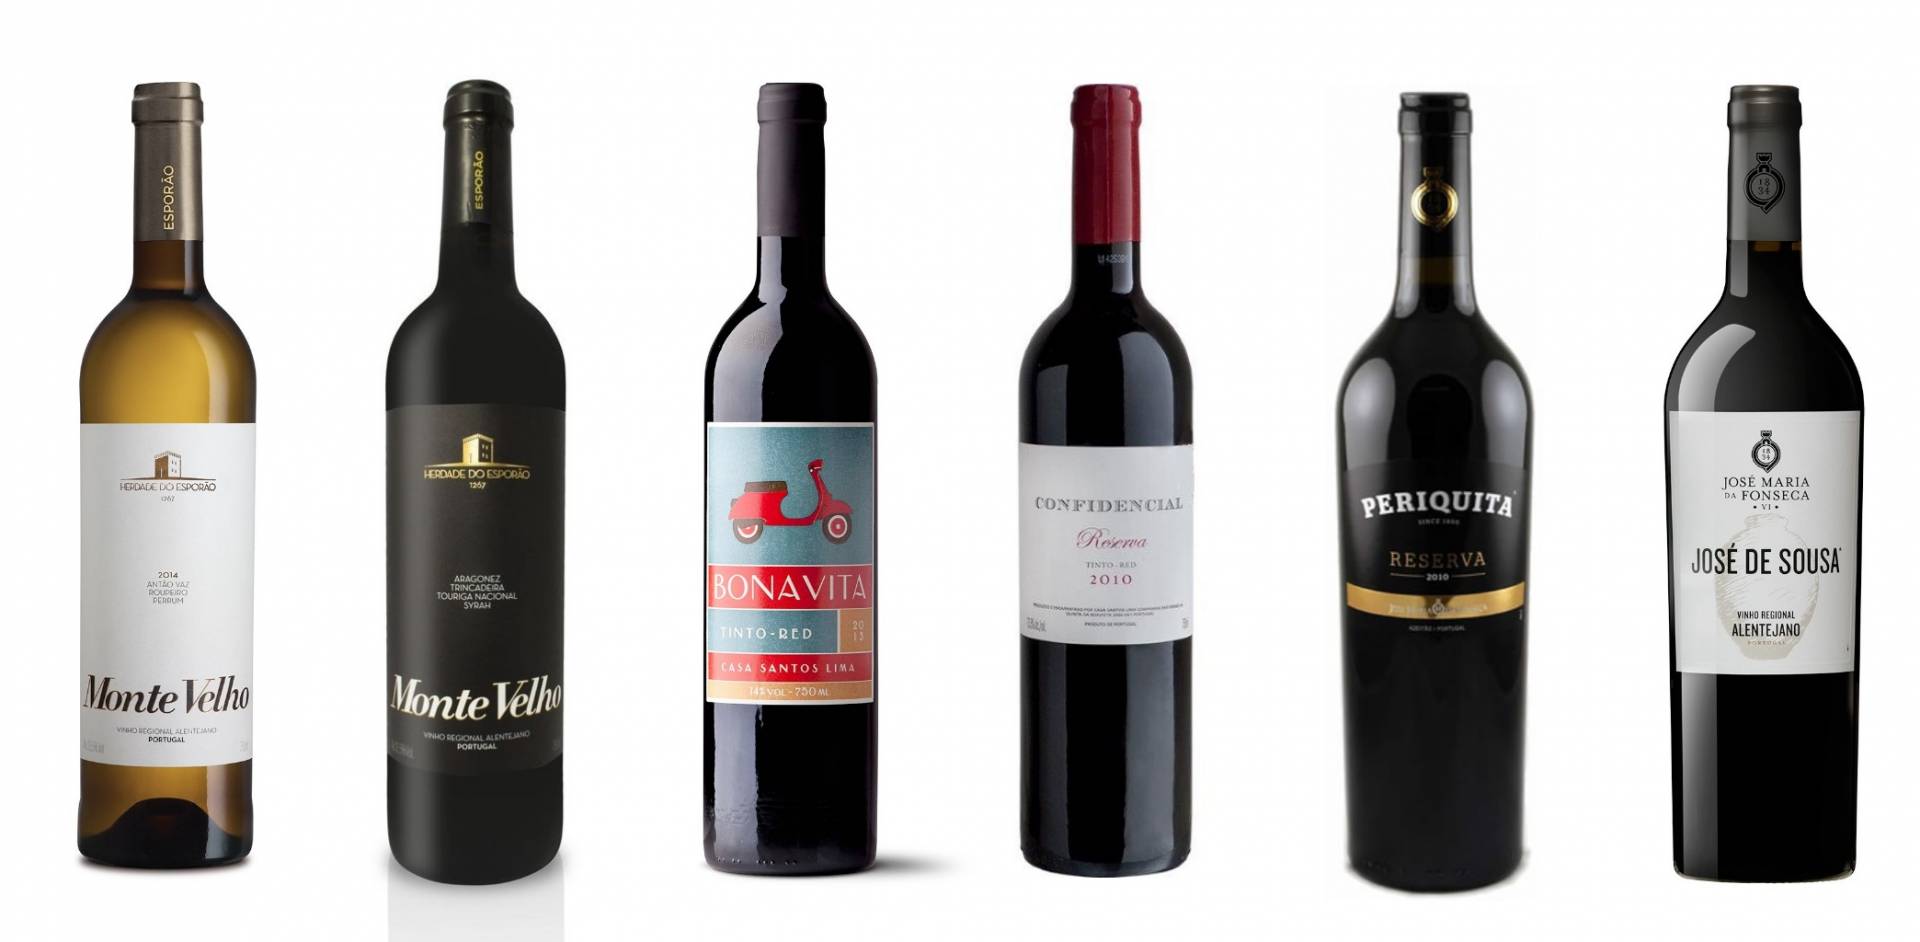 6 Portuguese Wines That Will Shake Up Your Vino Routine.